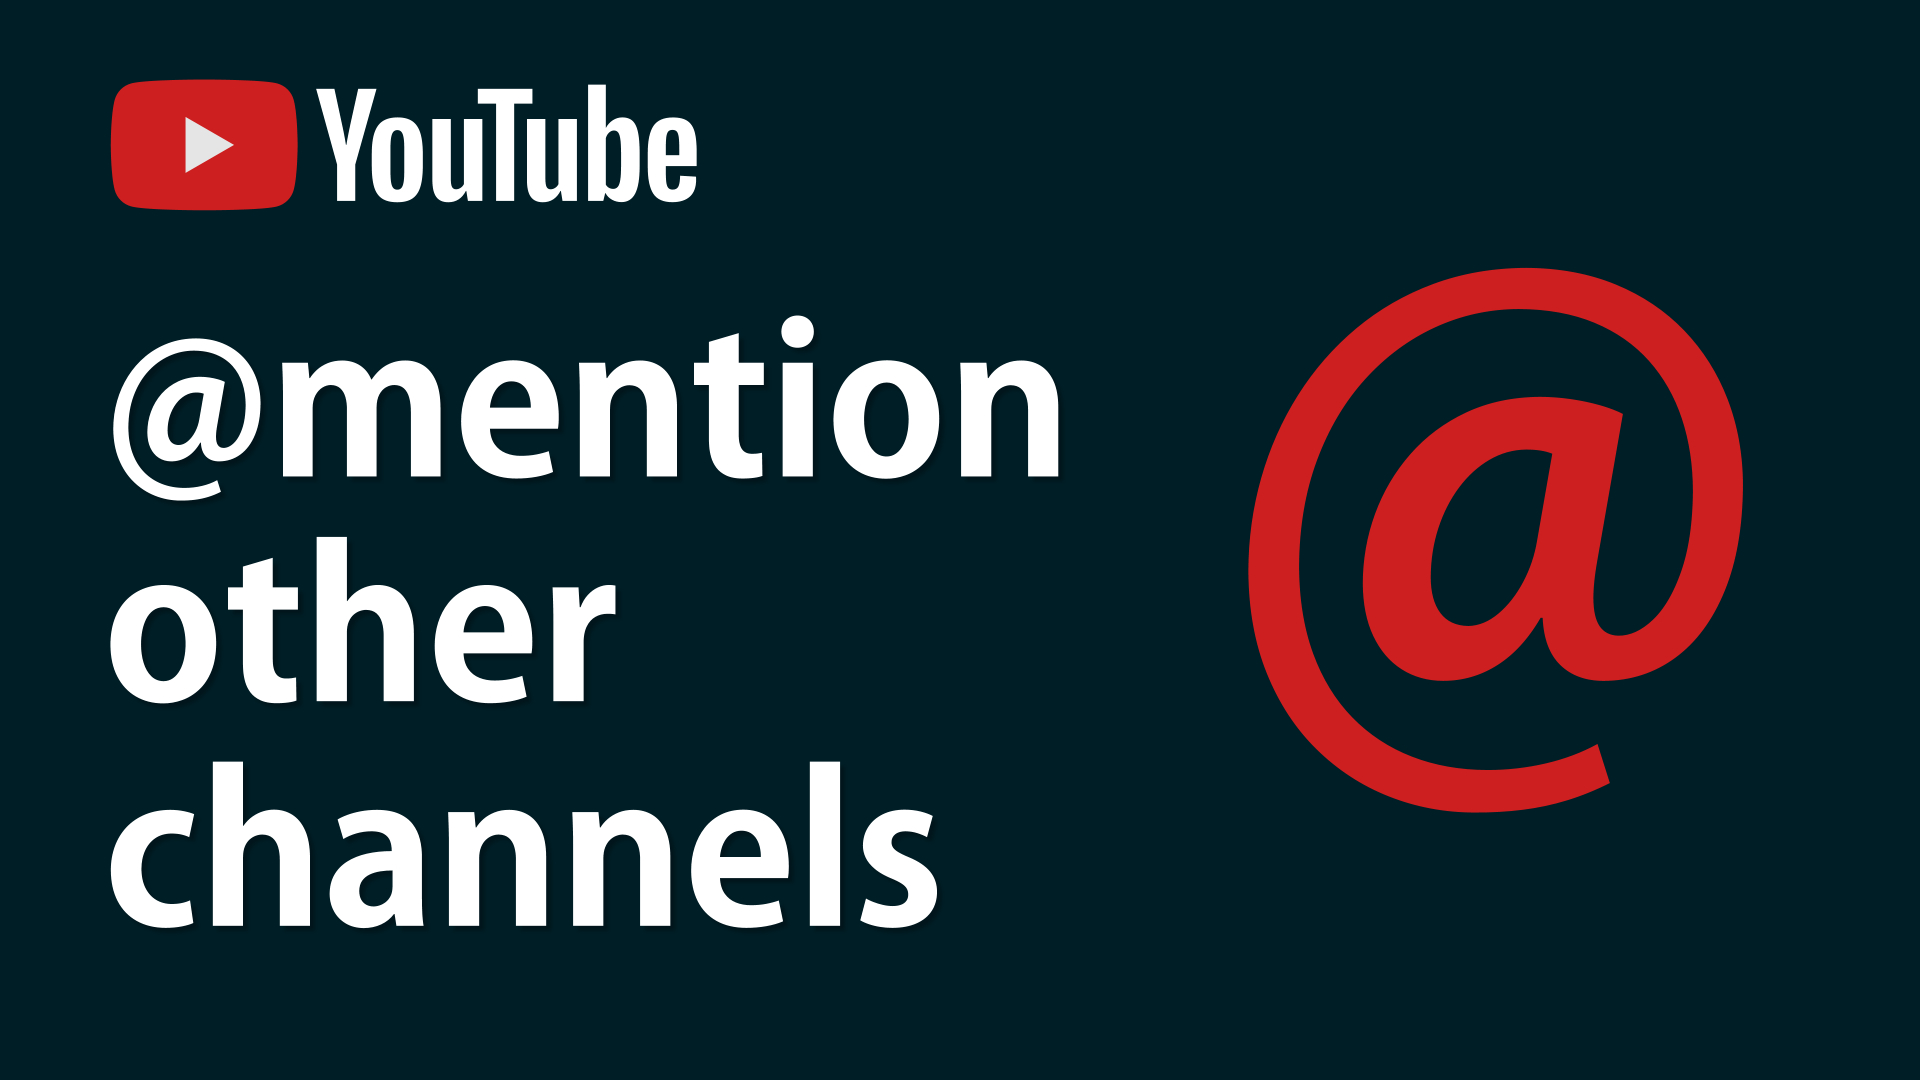 YouTube allows you to @mention other channels in your titles and description